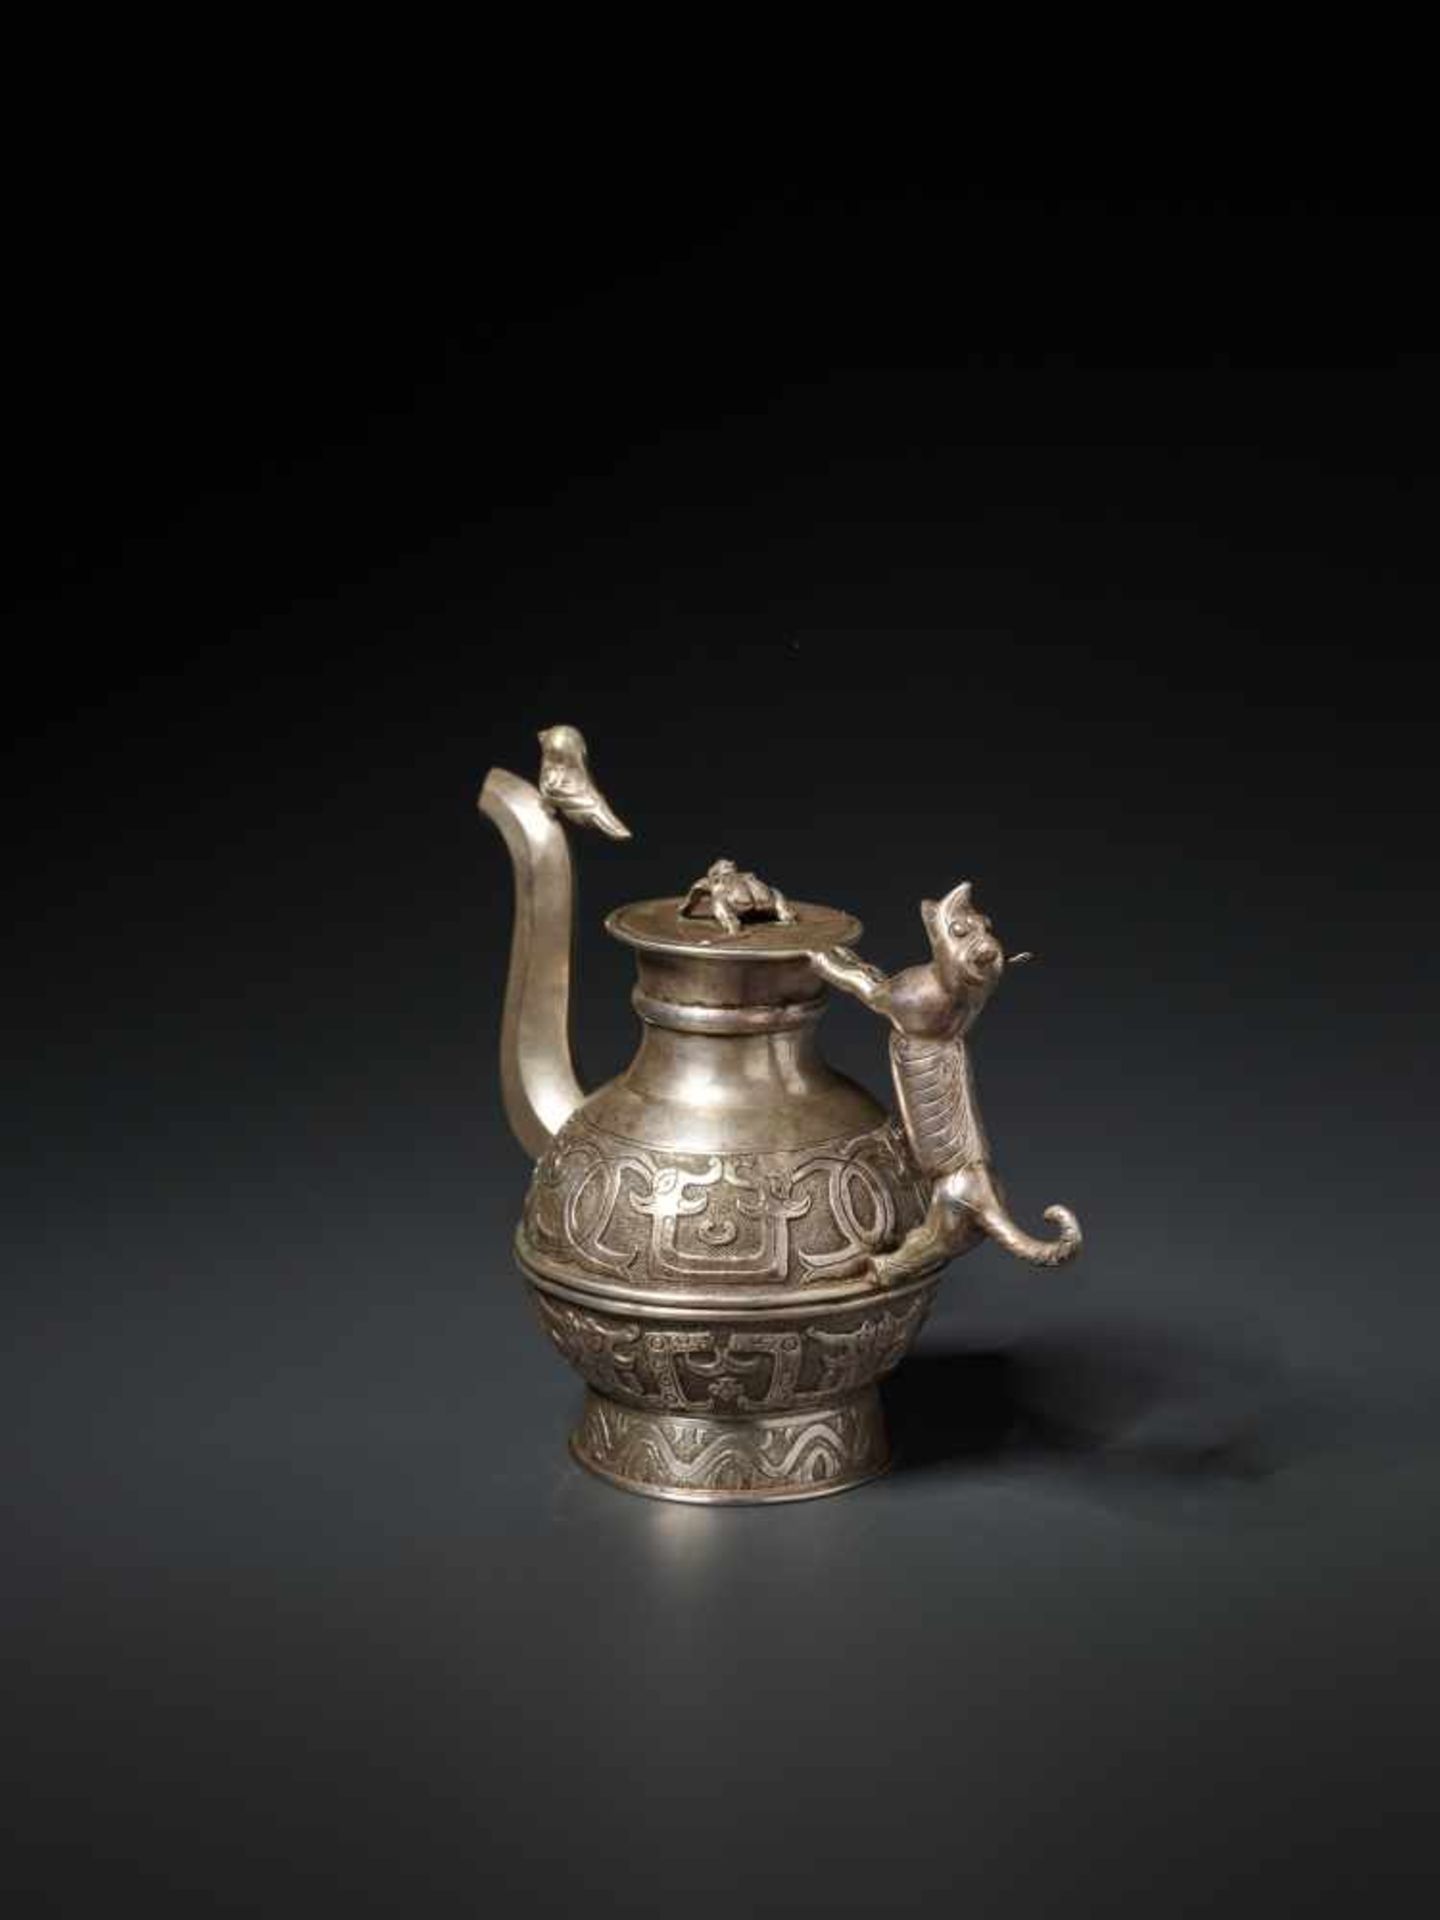 A WELL-CRAFTED ARCHAISTIC SILVER EWER, QING DYNASTY Silver, cast and chased China, Qing Dynasty This - Image 6 of 9